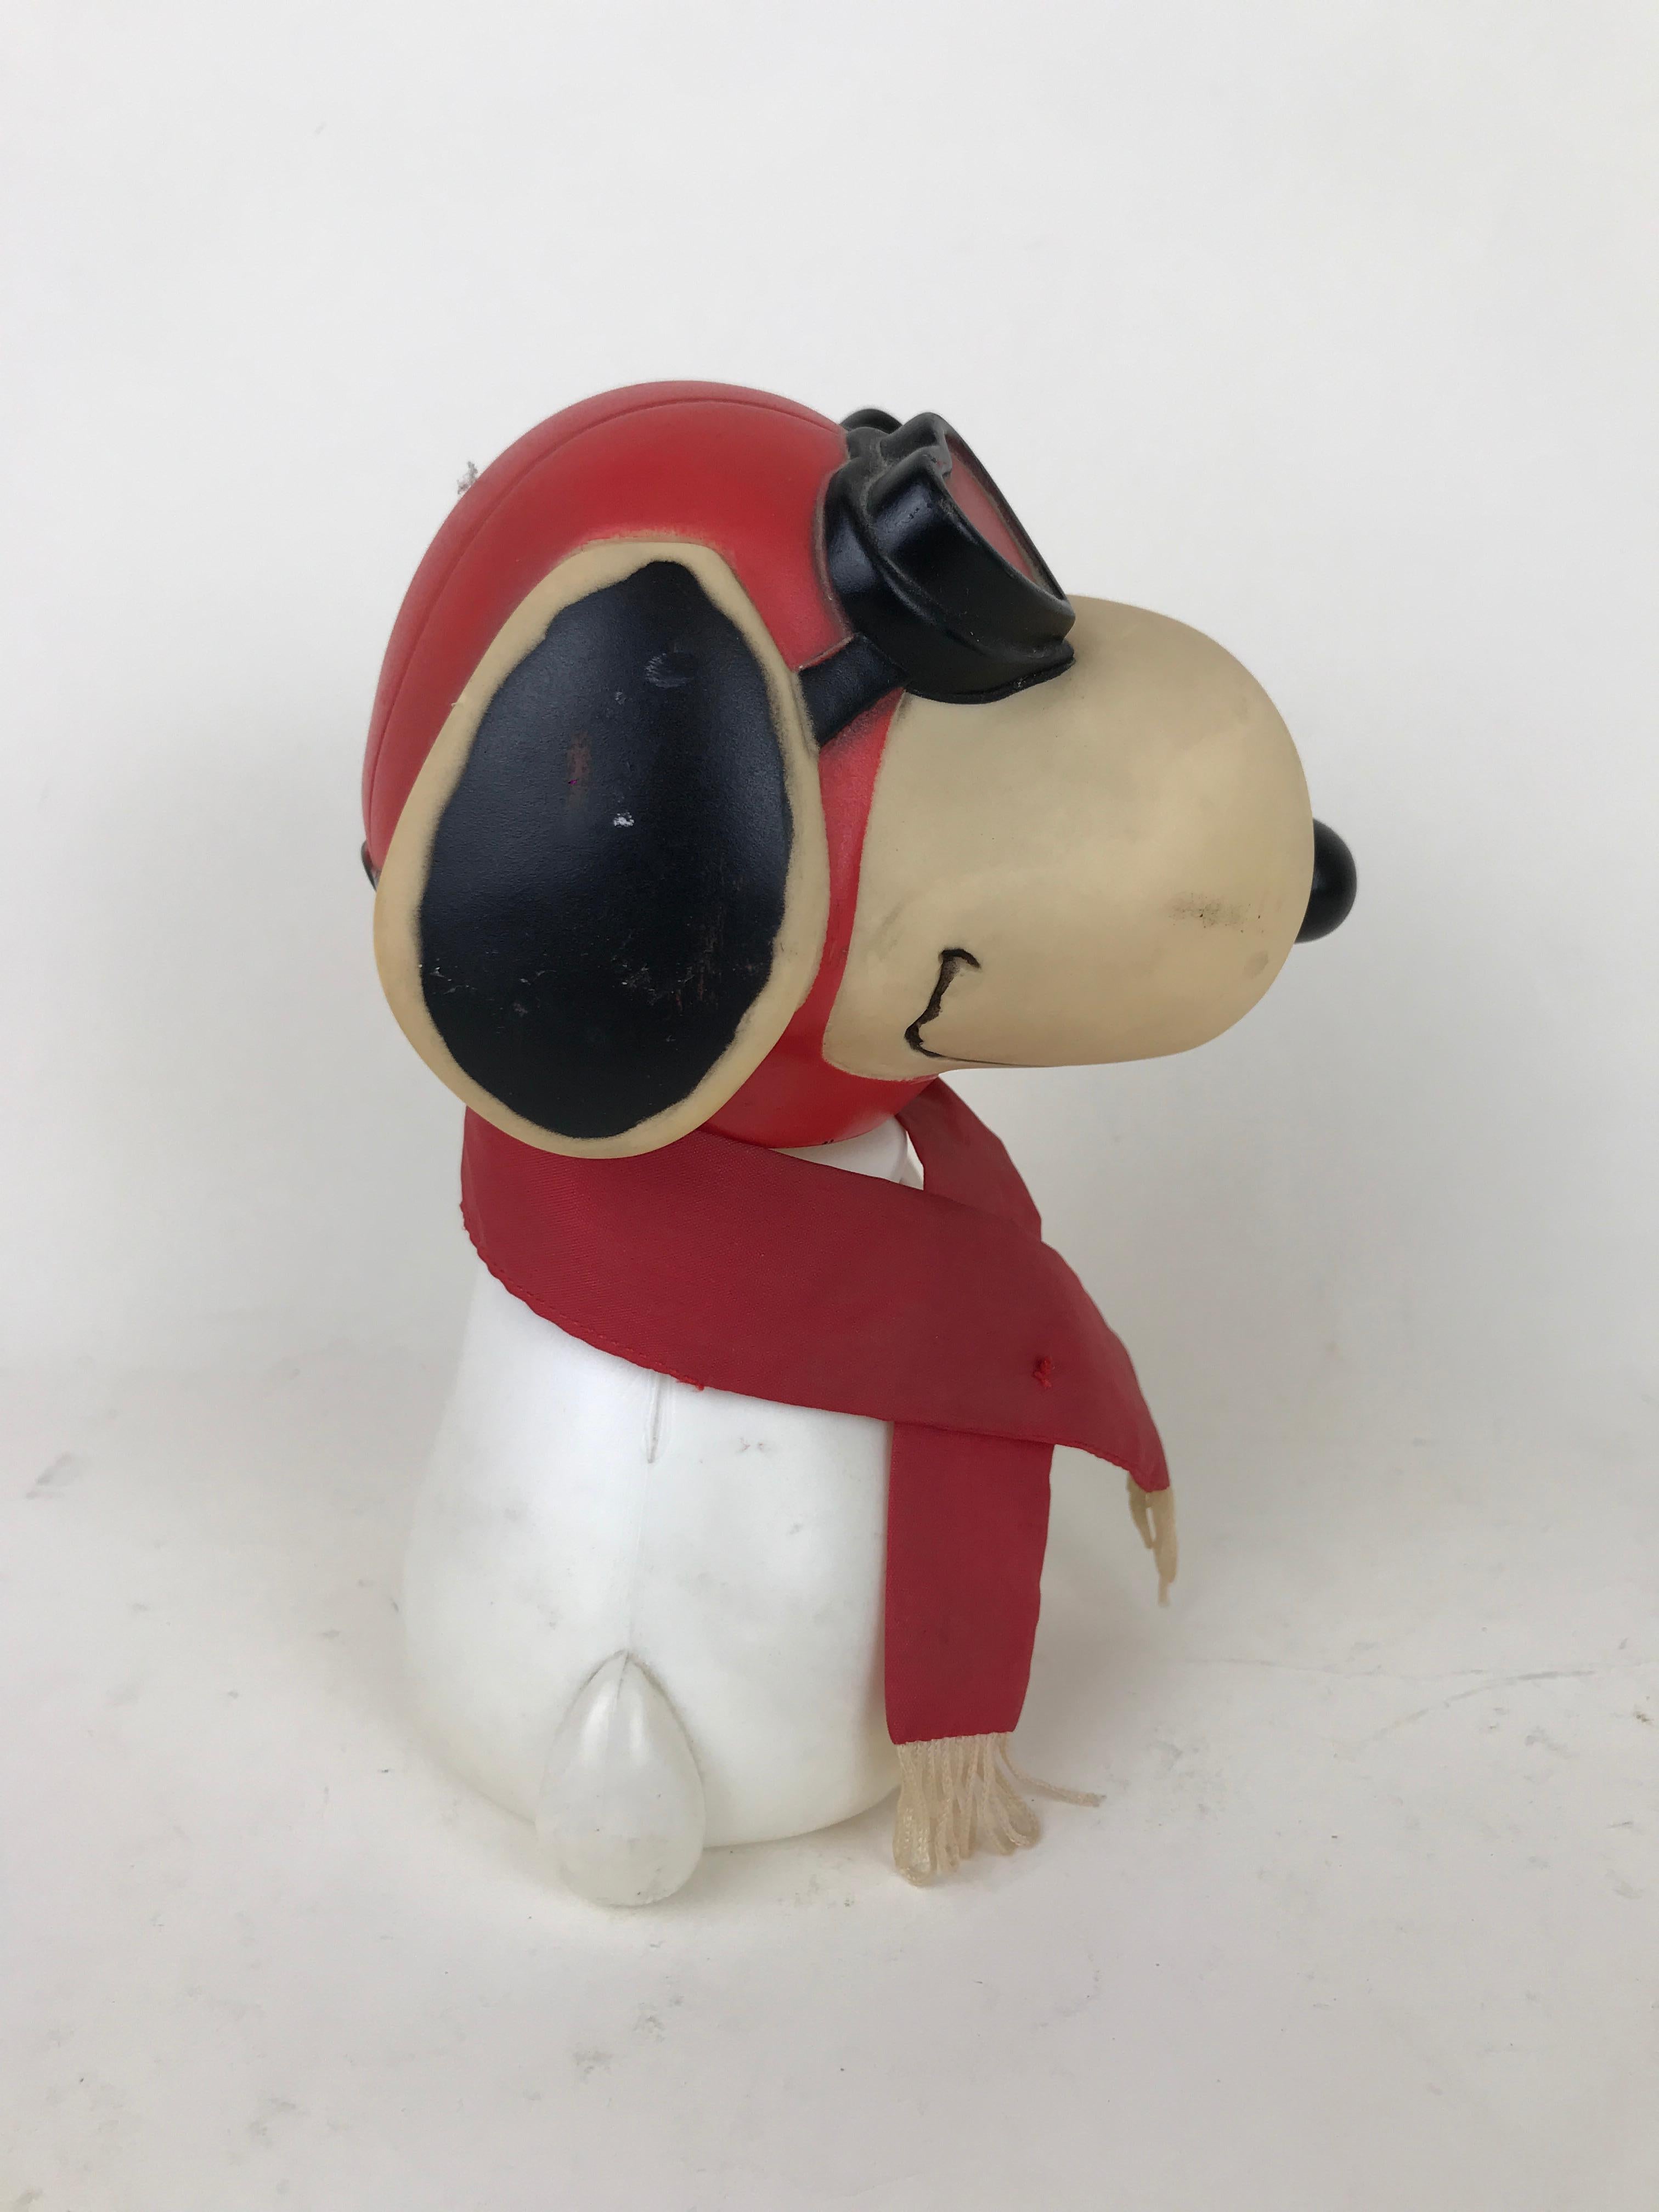 Mid-Century Modern 1960s Vintage Plastic Model of Snoopy Wearing Scarf and Heart Shaped Googles